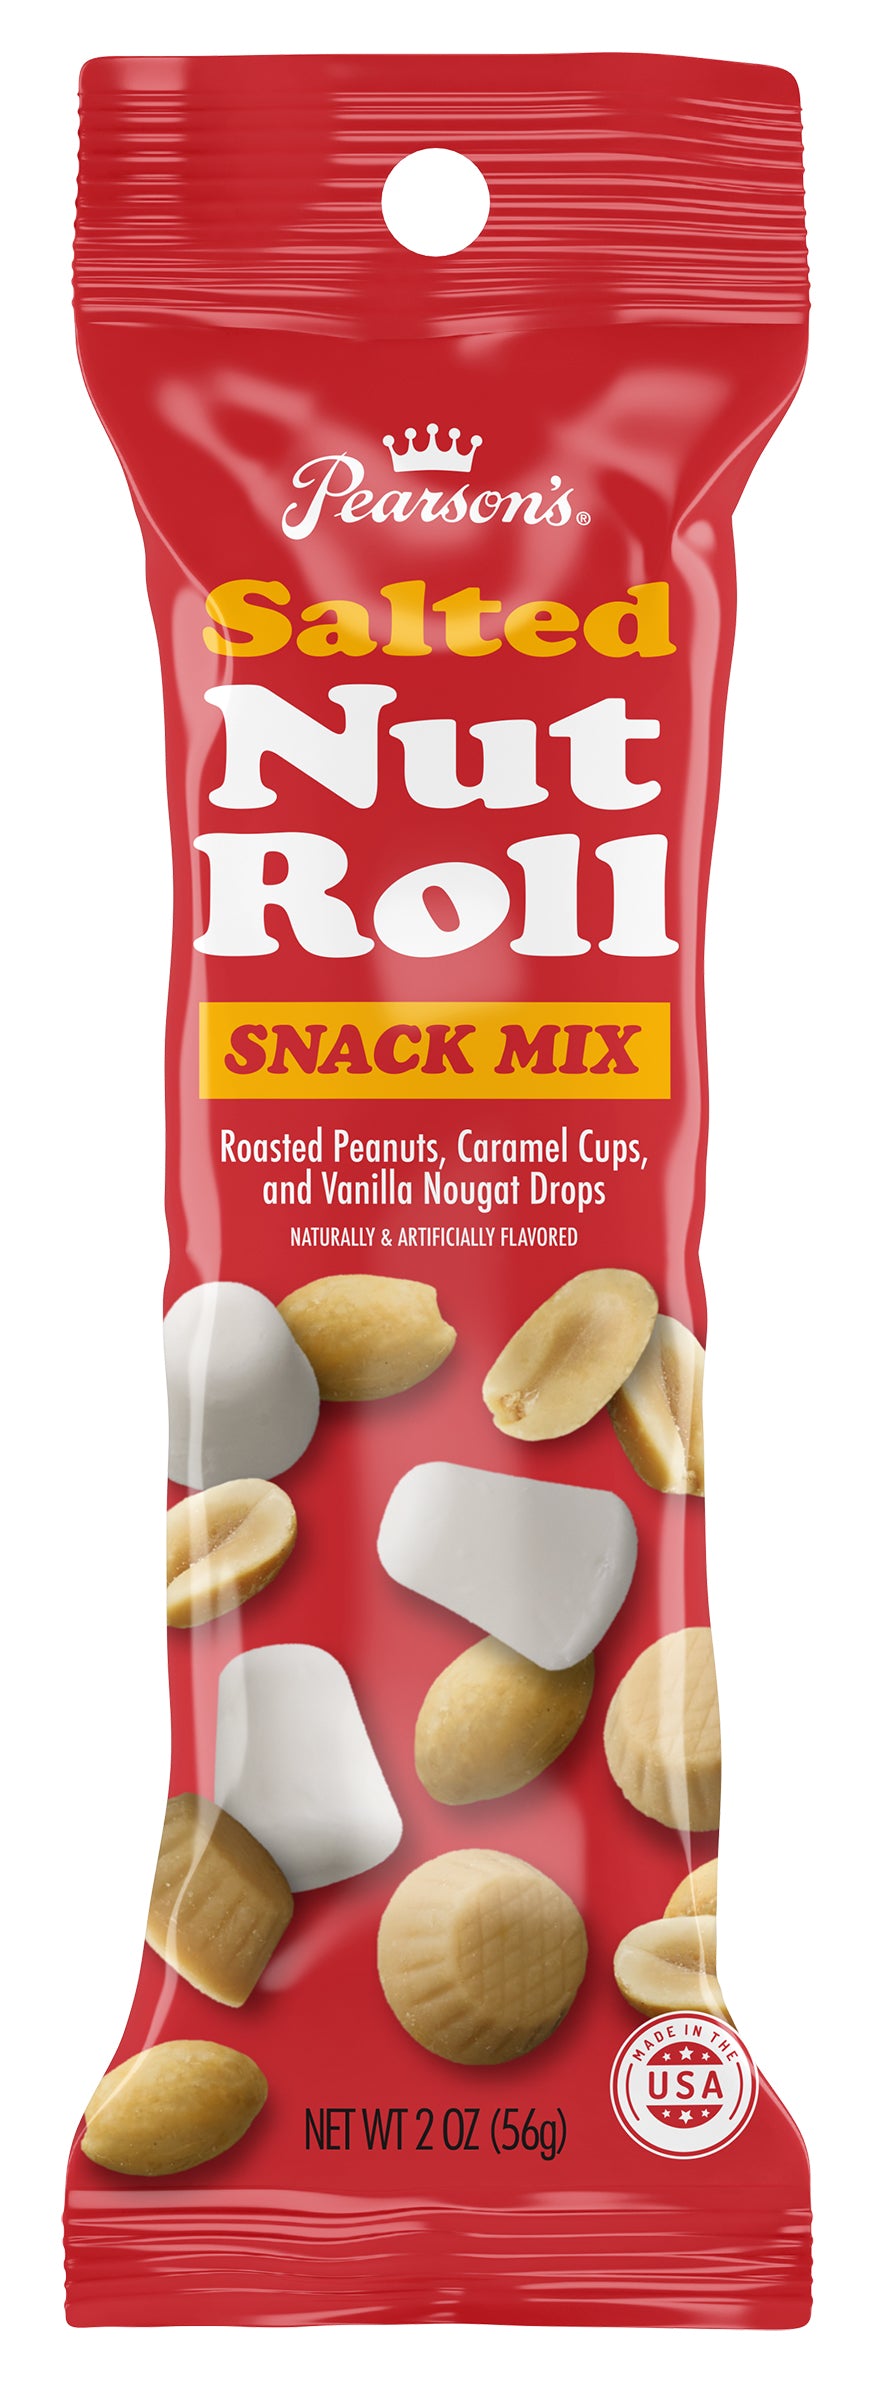 Salted Nut Roll Snack Mix Case-2 oz.-12/Box-6/Case